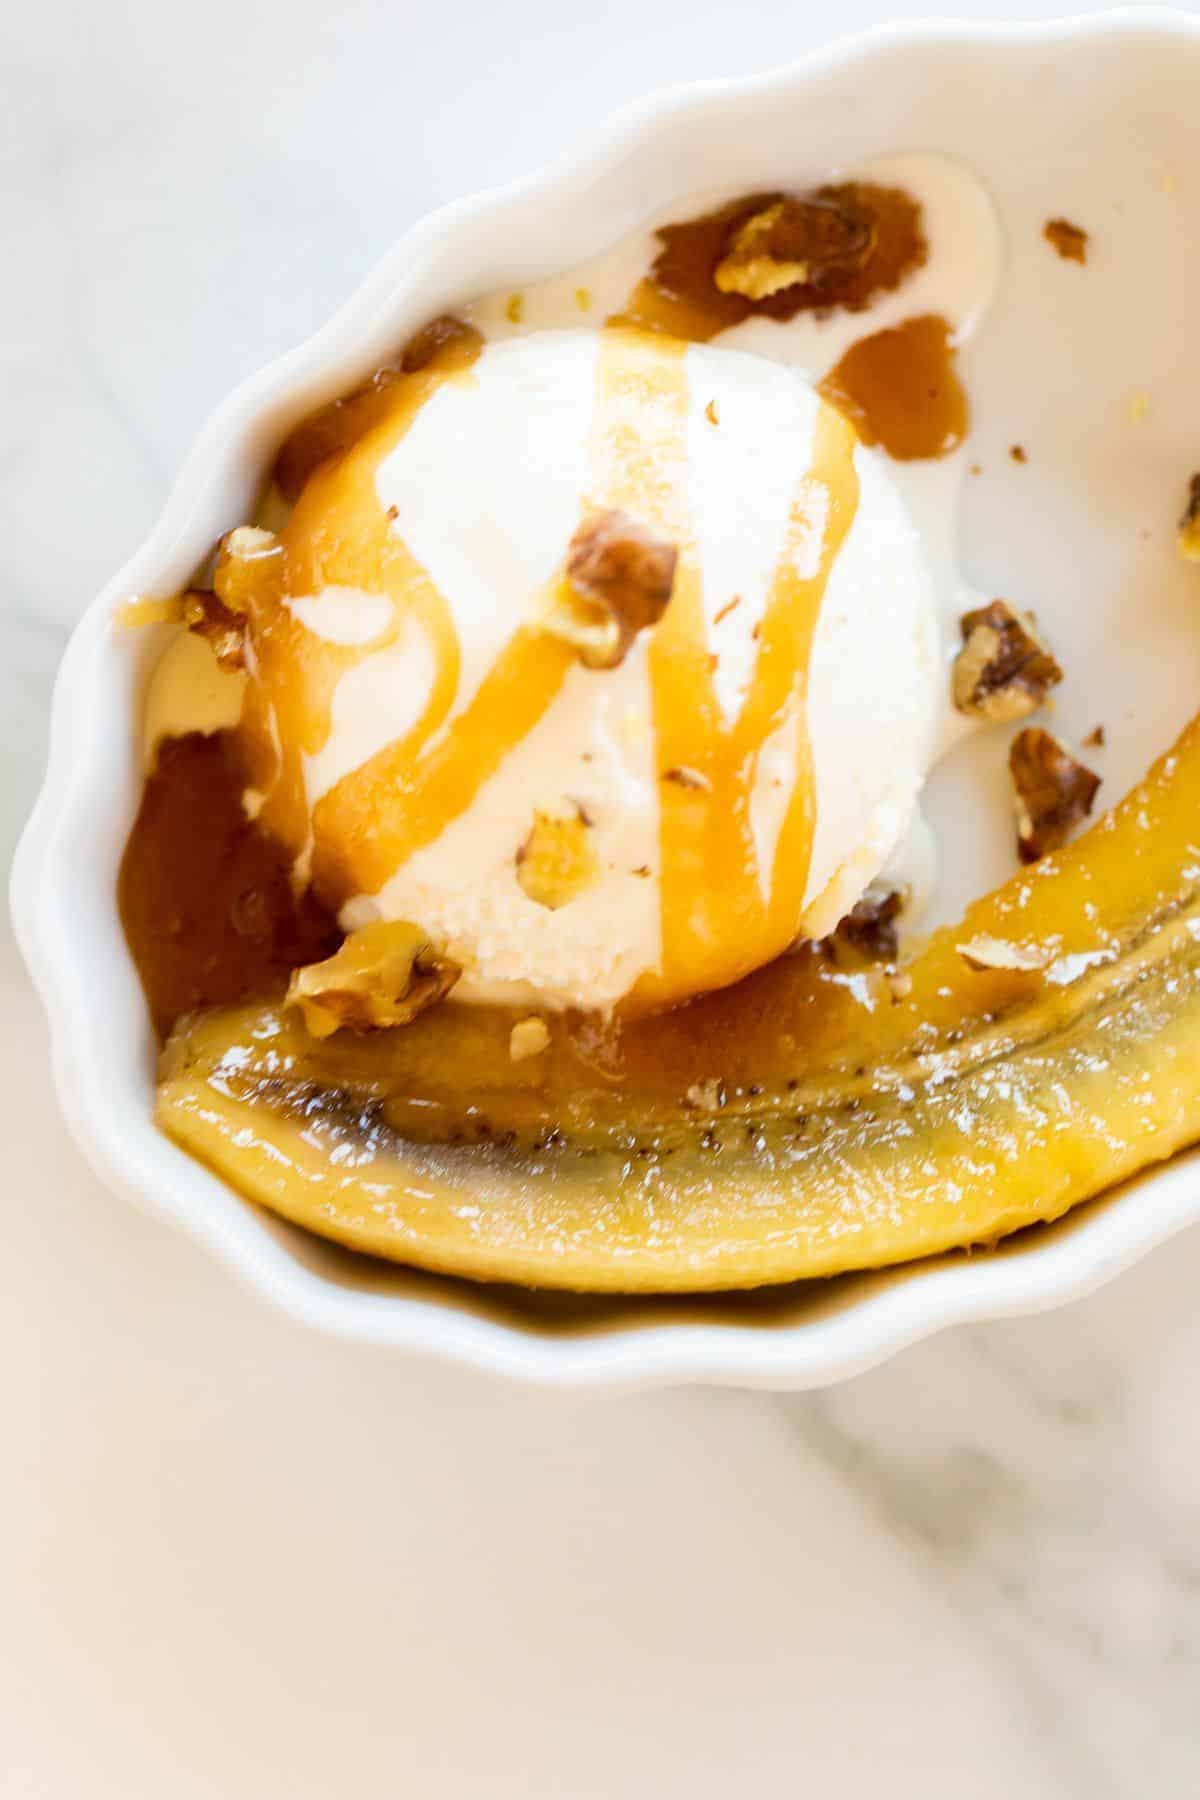 An oval ramekin filled with a cooked banana and a scooper of ice cream with caramel sauce.